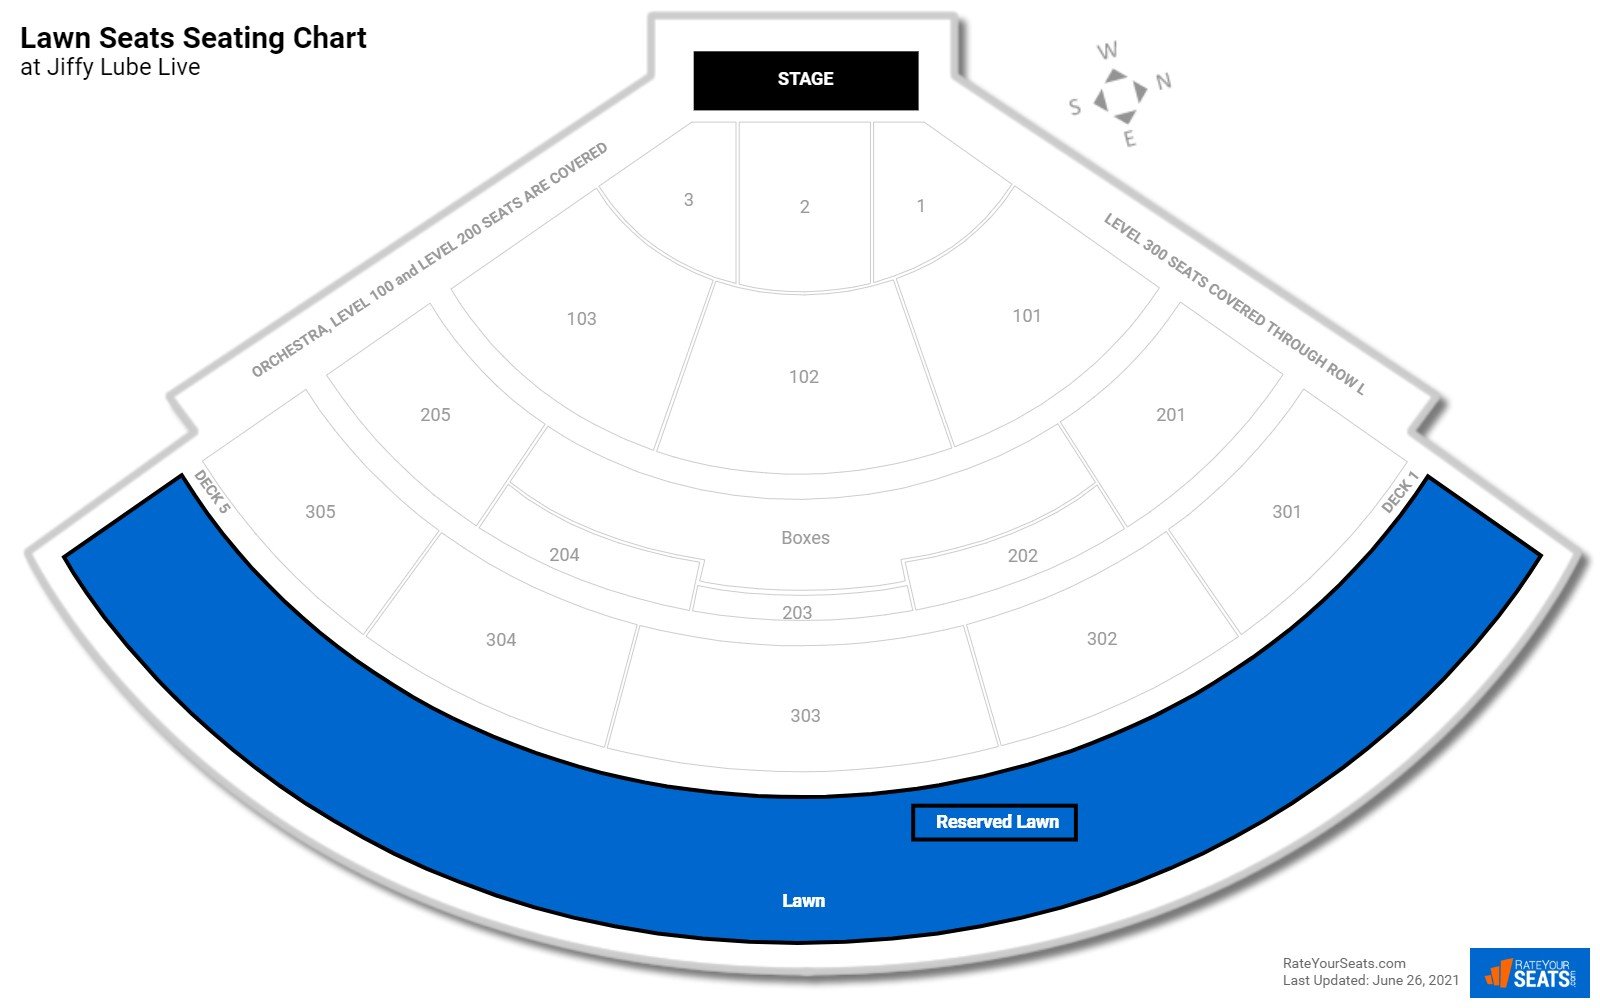 Concert Lawn Seats Seating Chart at Jiffy Lube Live